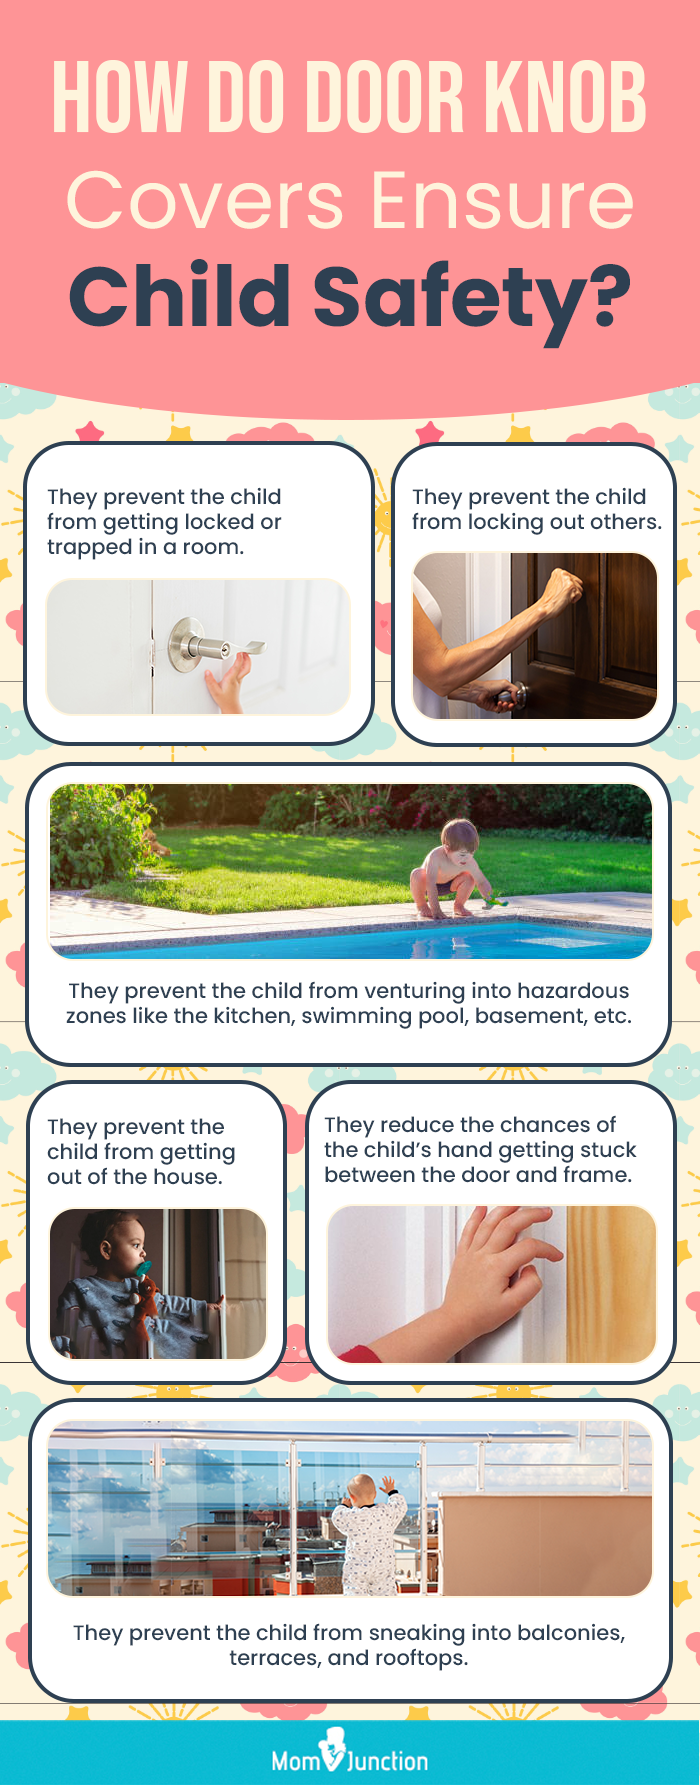 How Do Door Knob Covers Ensure Child Safety (Infographic)